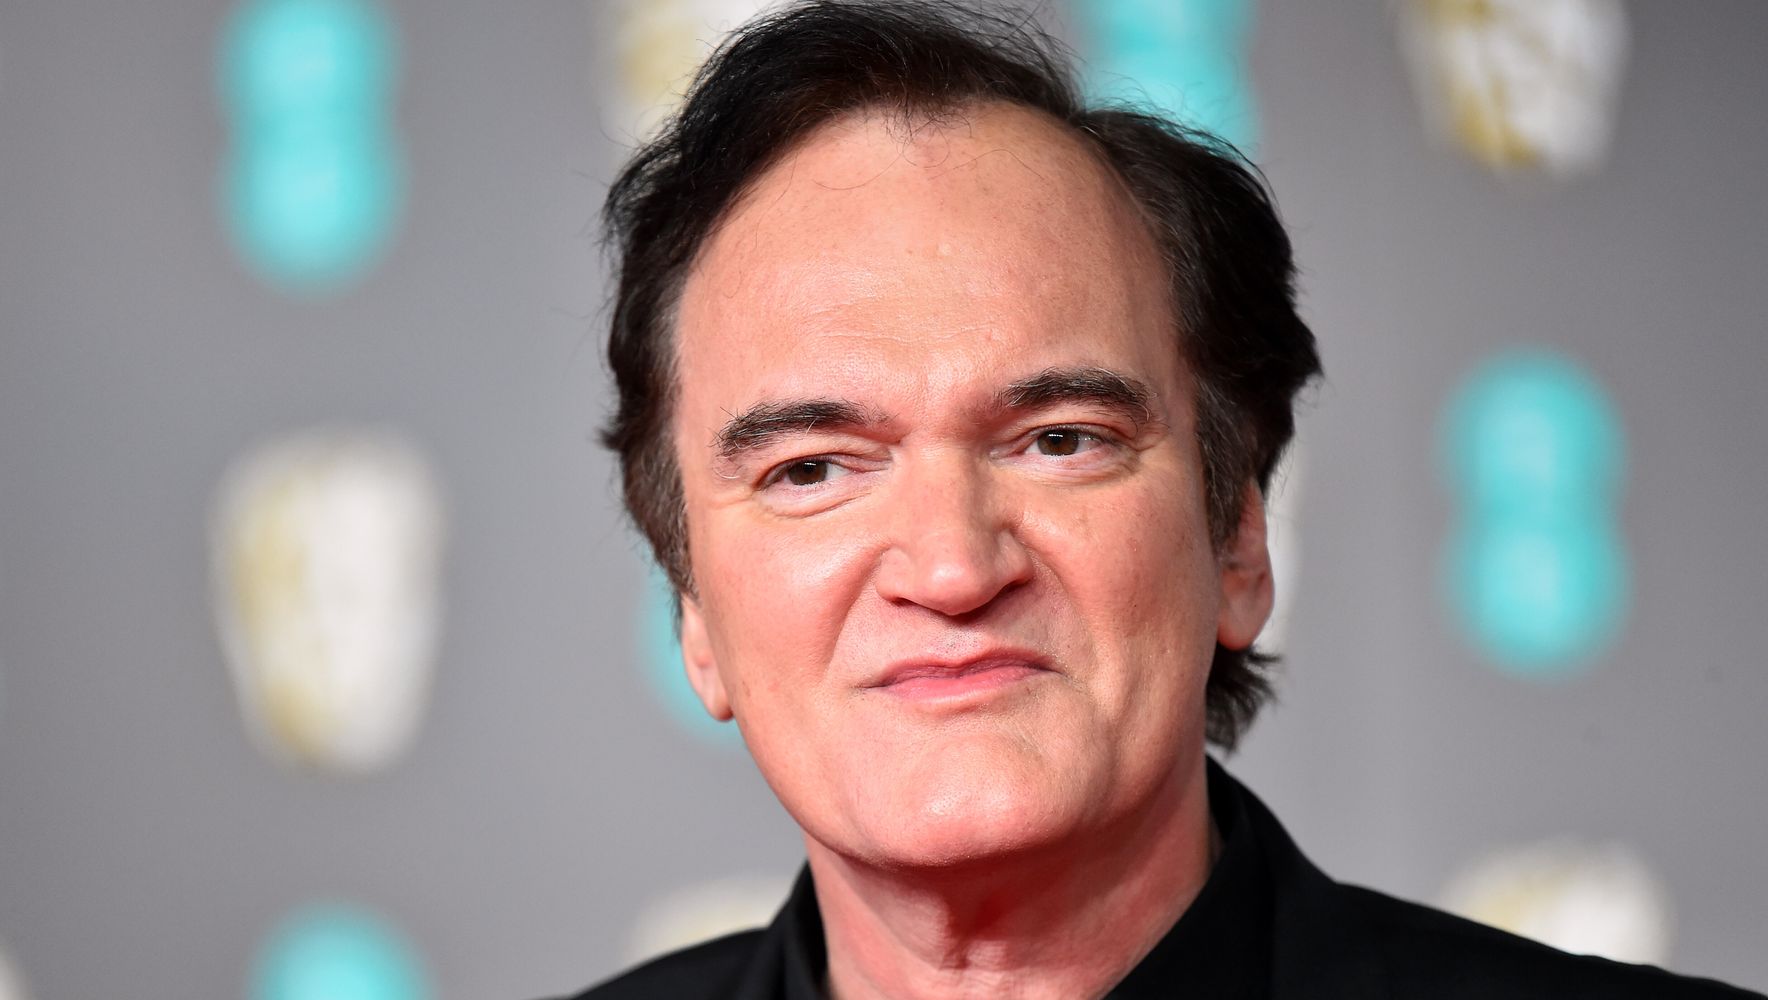 Quentin Tarantino Vowed Never To Give His Mom A ‘Penny’ Due To Childhood Vendetta